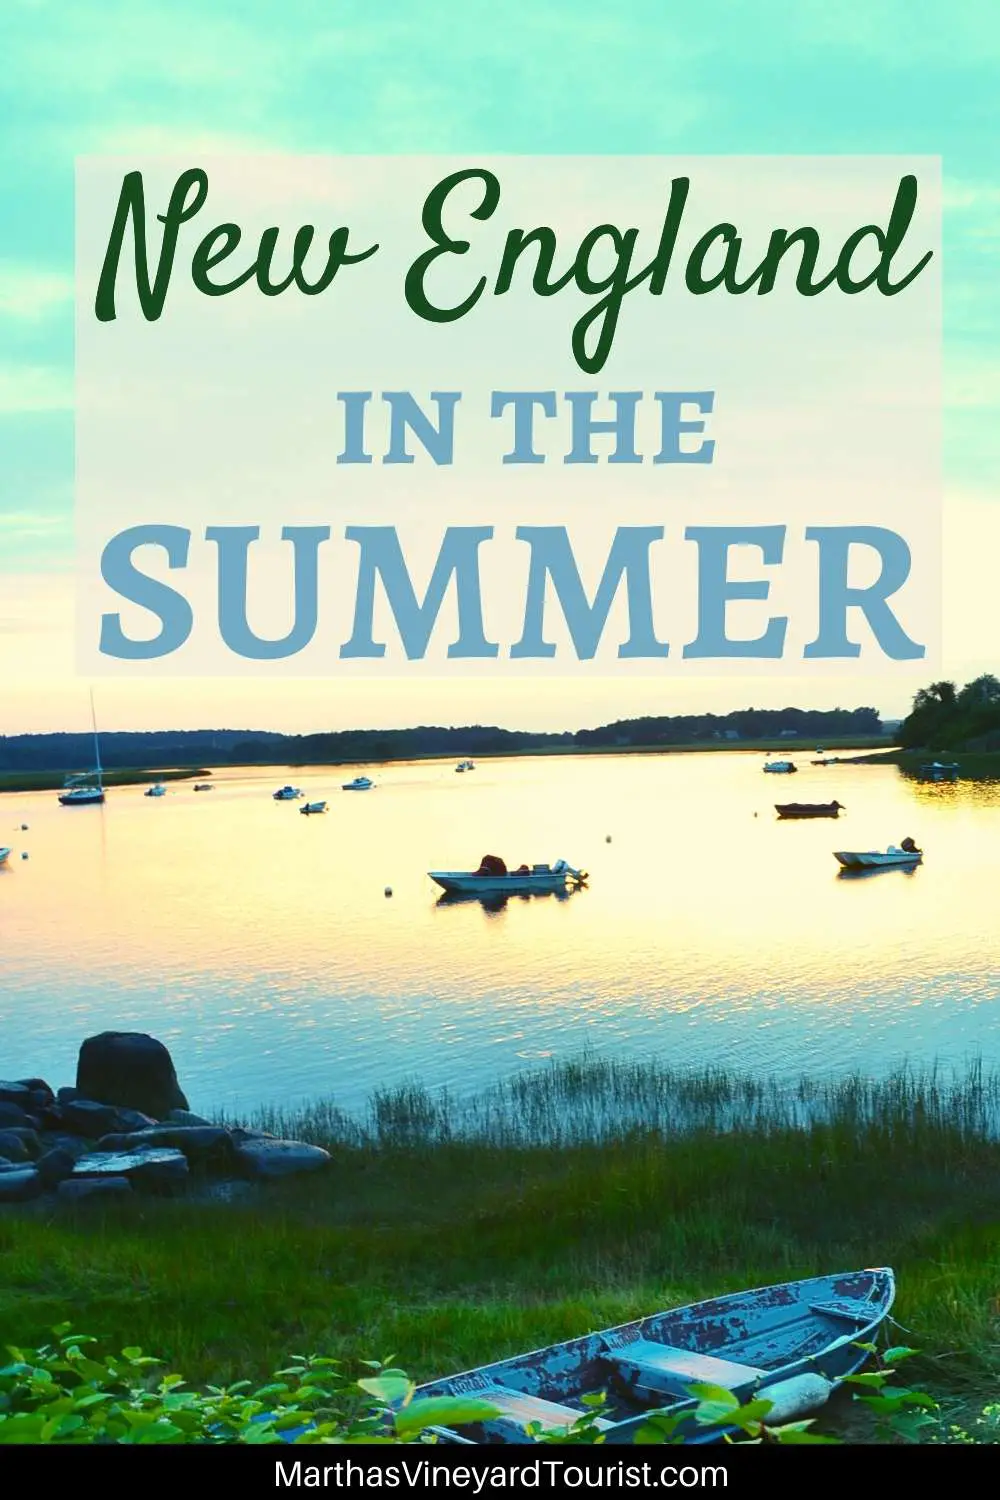 Pinterest imagoes a New England harbor with boats at sunset and with the text: "New England in the summer"